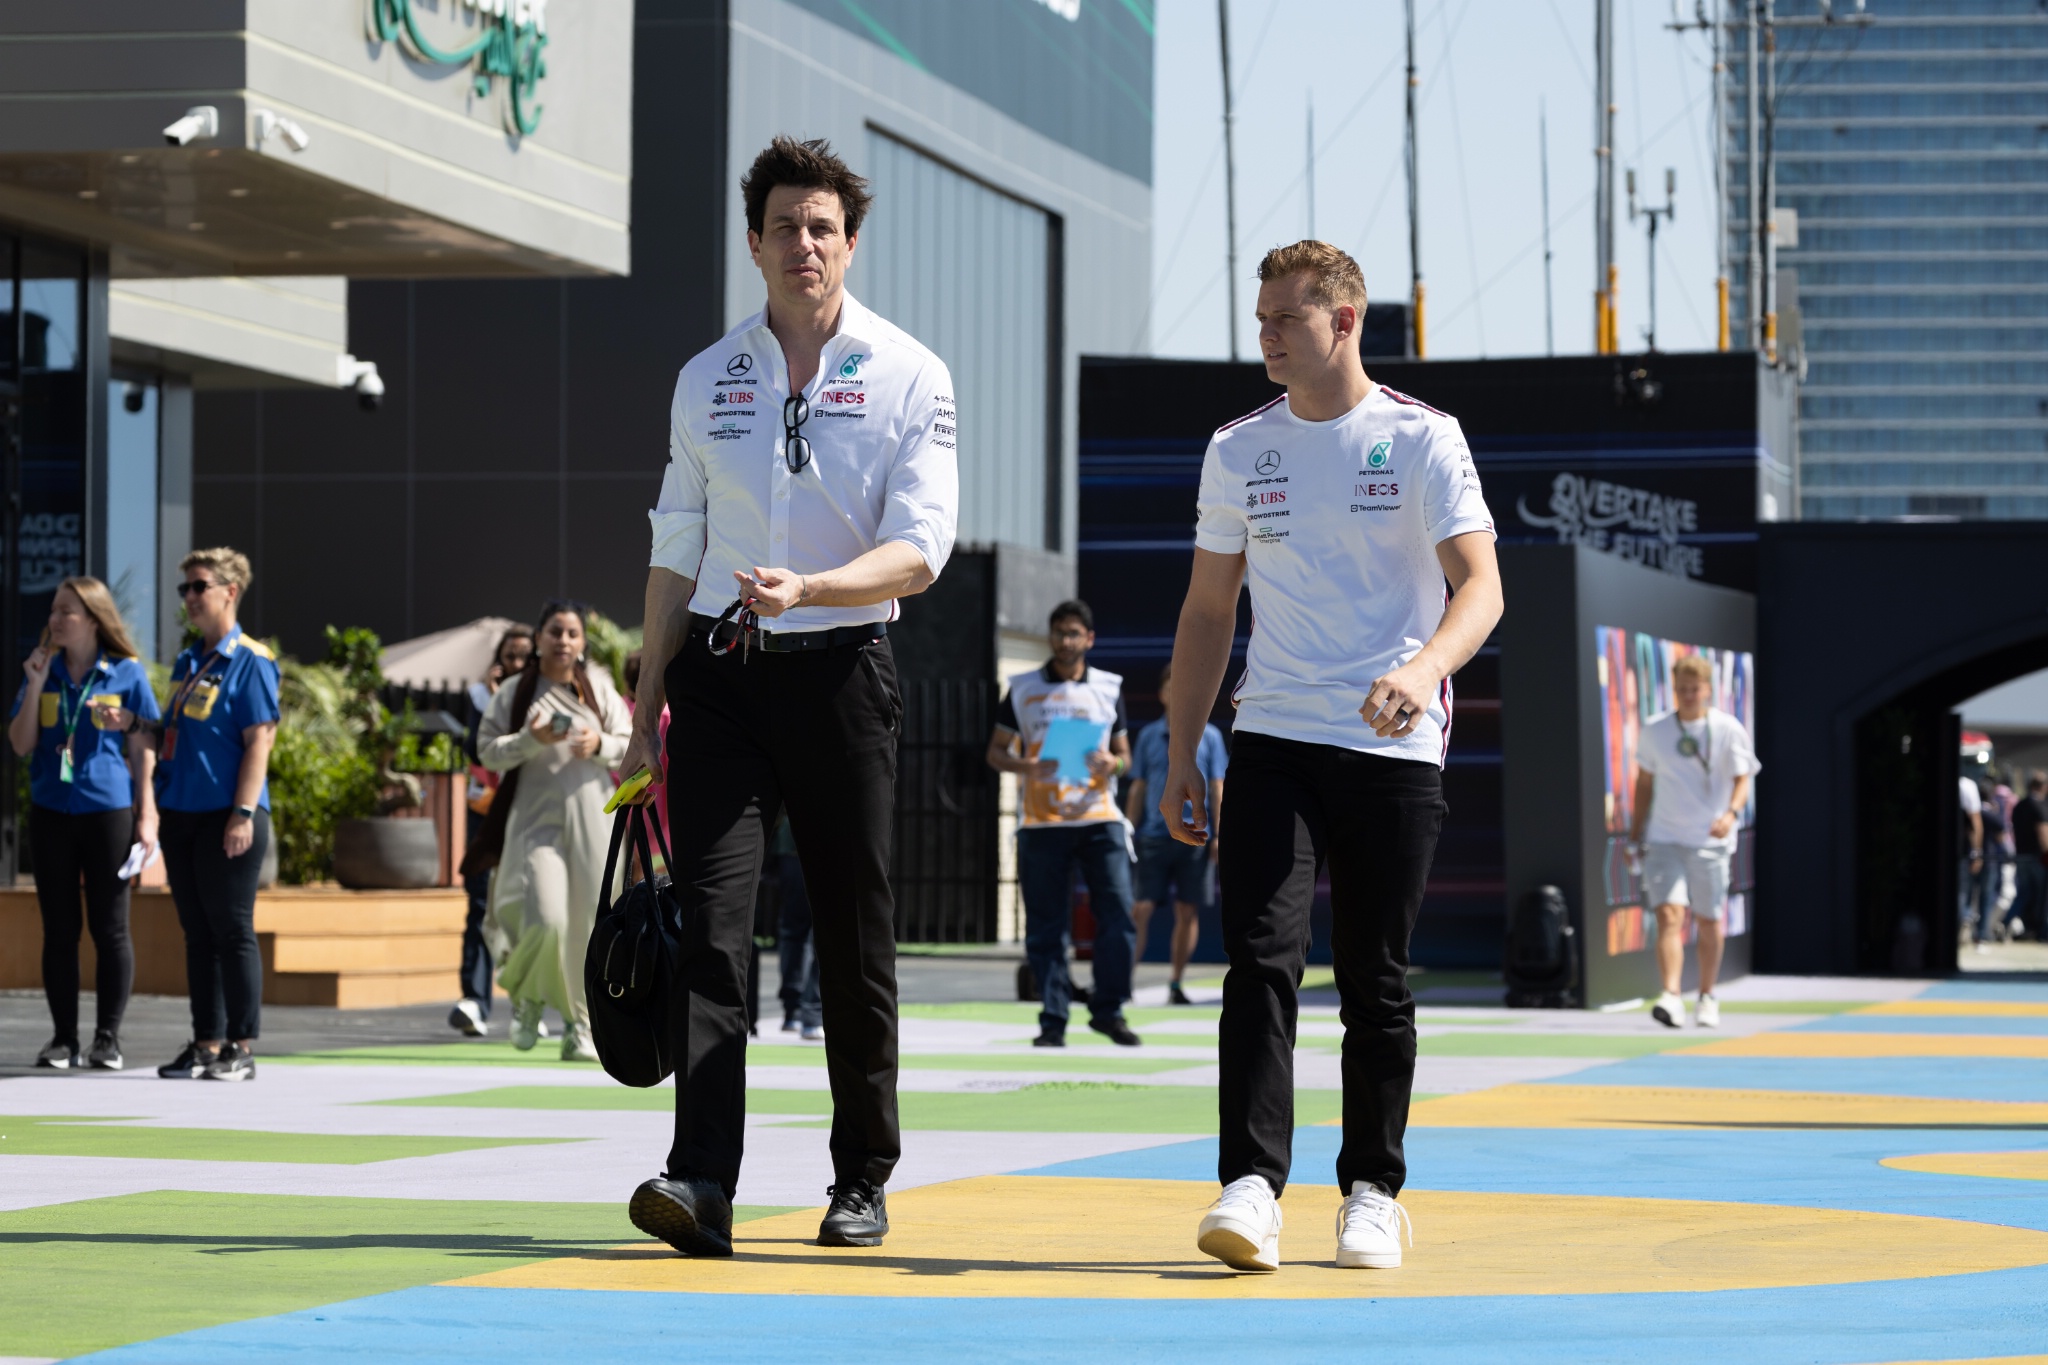 (L to R): Toto Wolff (GER) Mercedes AMG F1 Shareholder and Executive Director with Mick Schumacher (GER) Mercedes AMG F1